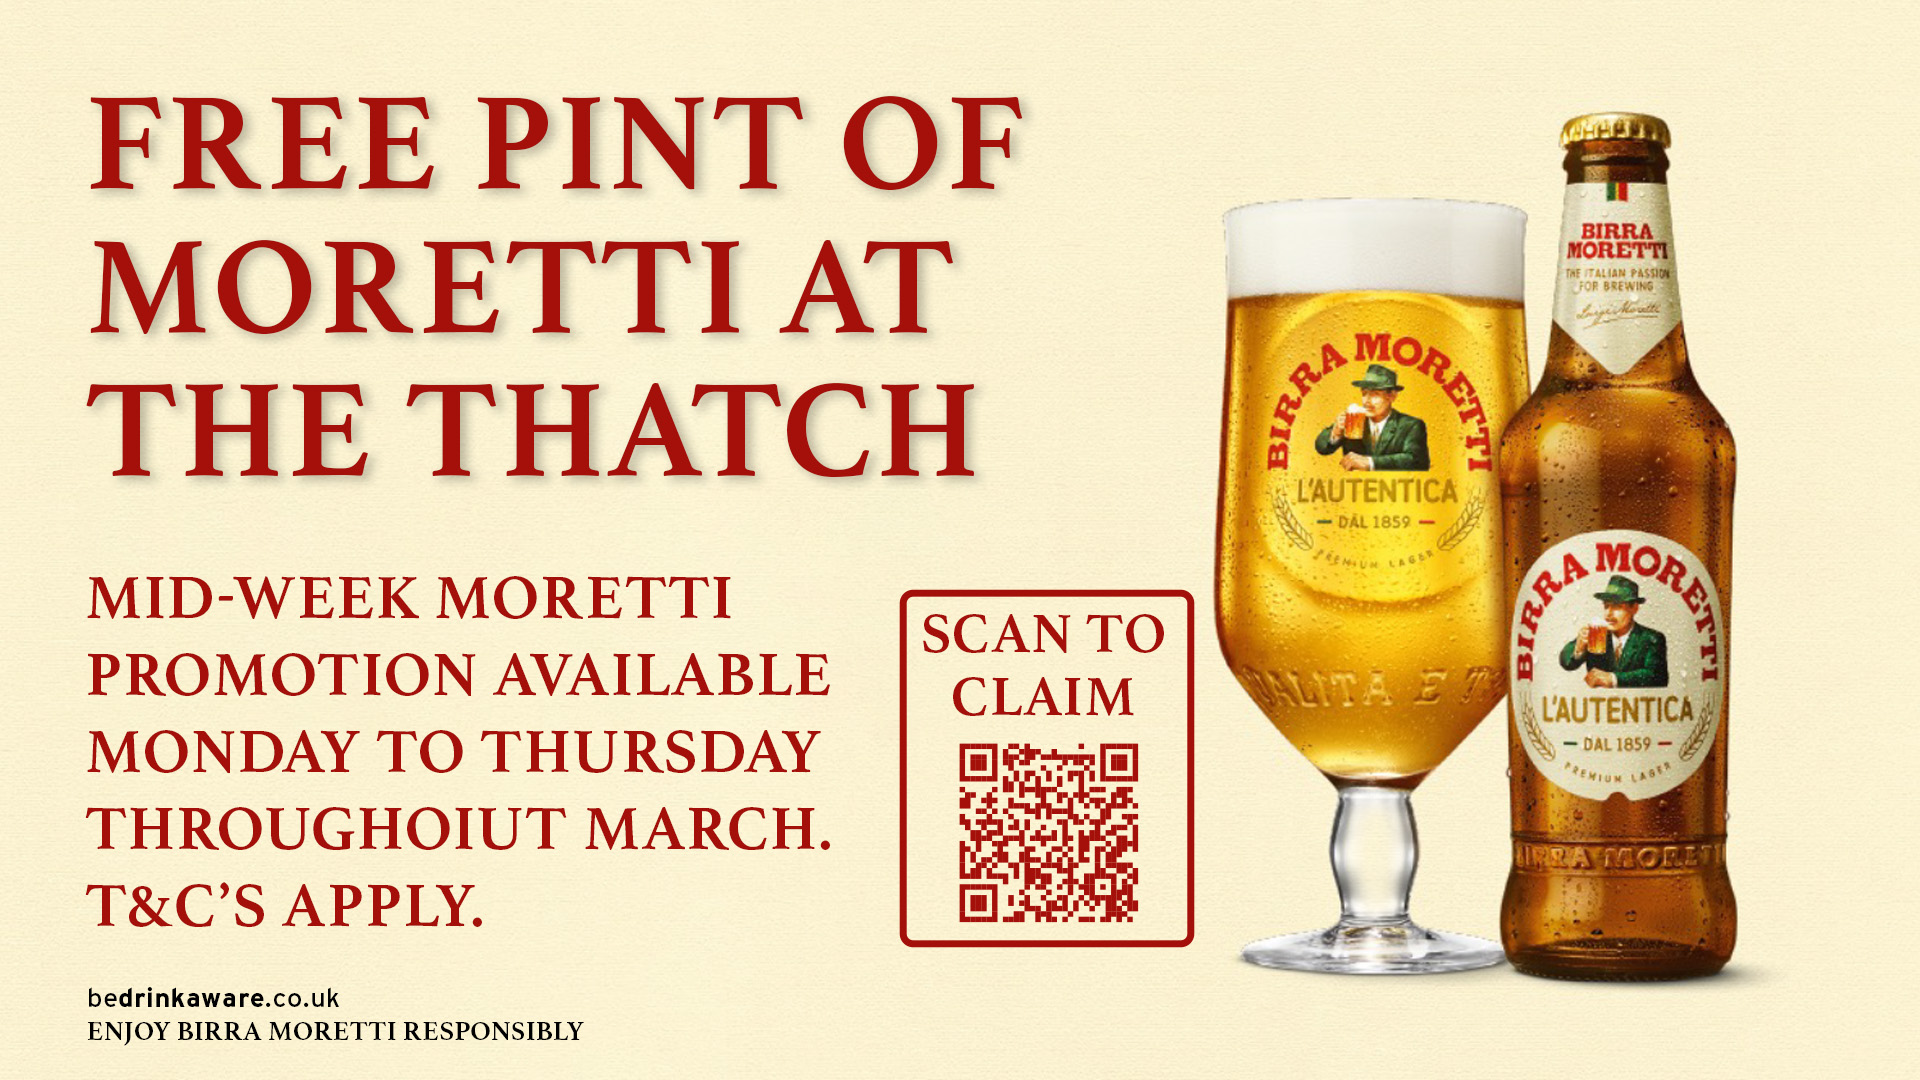 FREE Pint of Birra Moretti at The Thatched Tavern Honeybourne - Monday-Thursdays throughout March. T&C's apply.